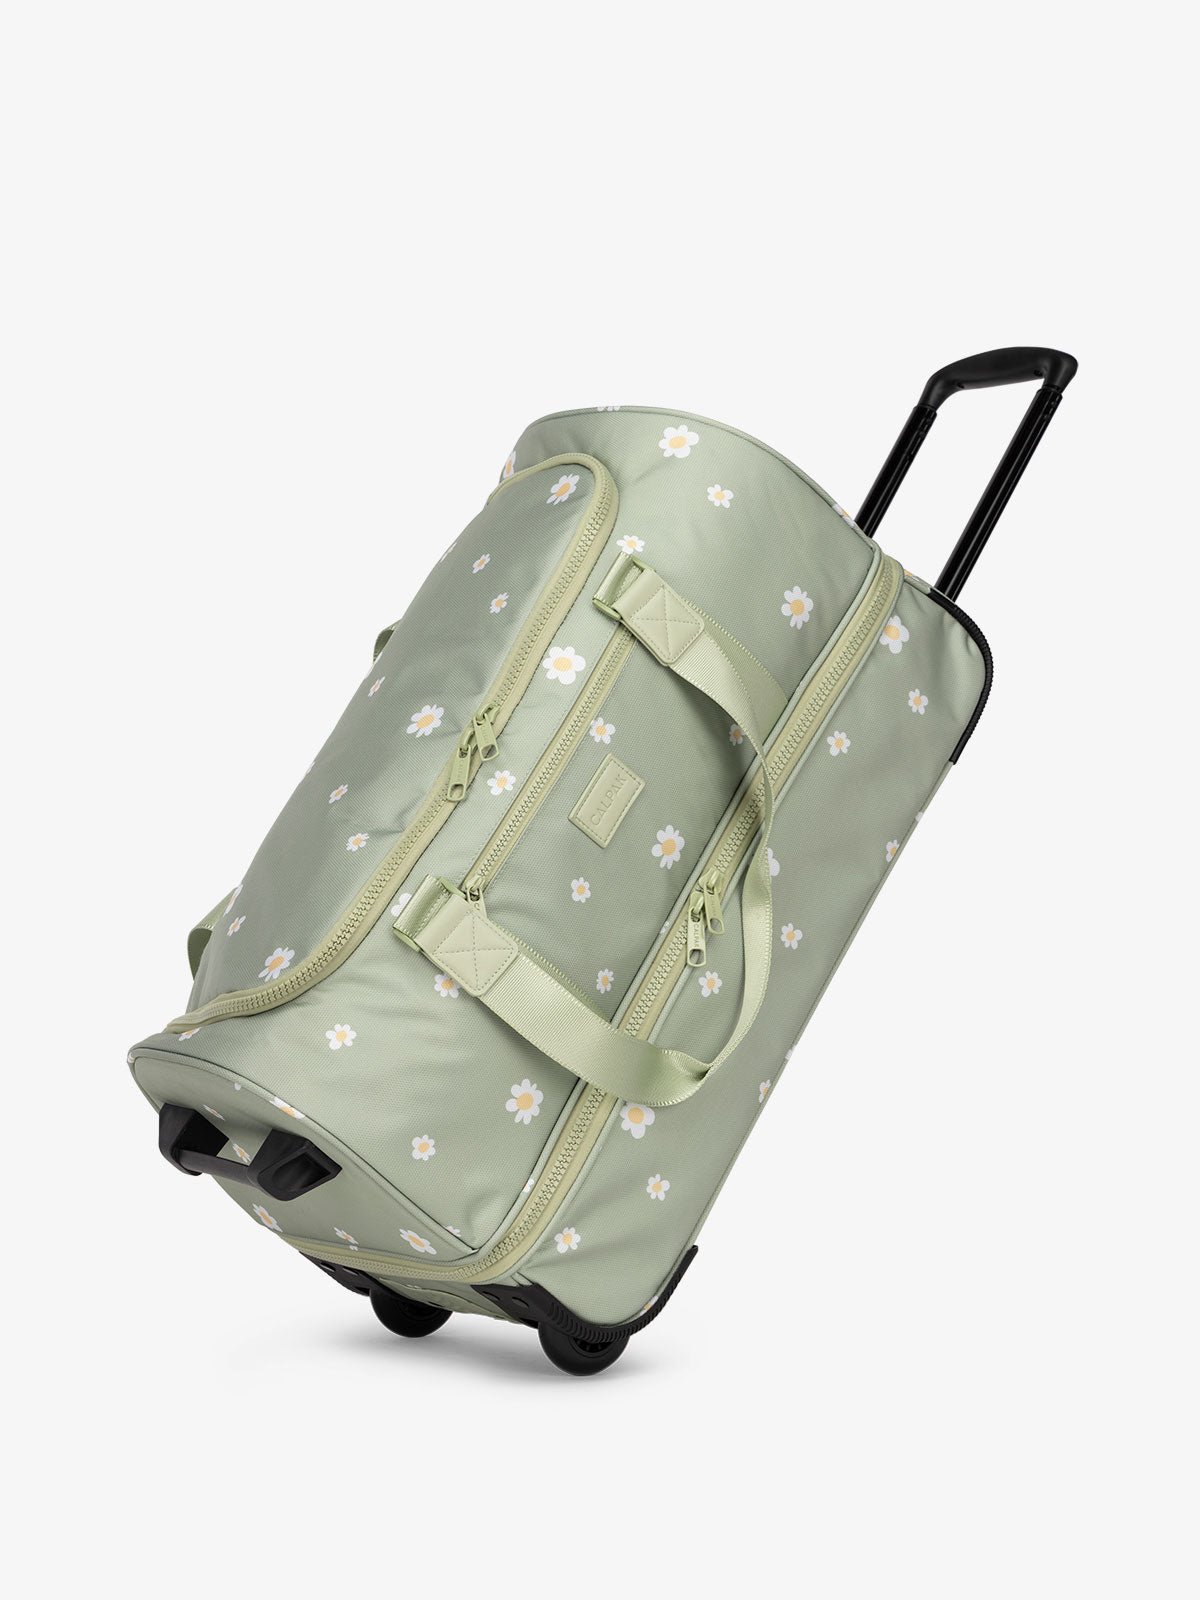 CALPAK Stevyn Rolling Duffel side view with top handle extended in daisy floral print